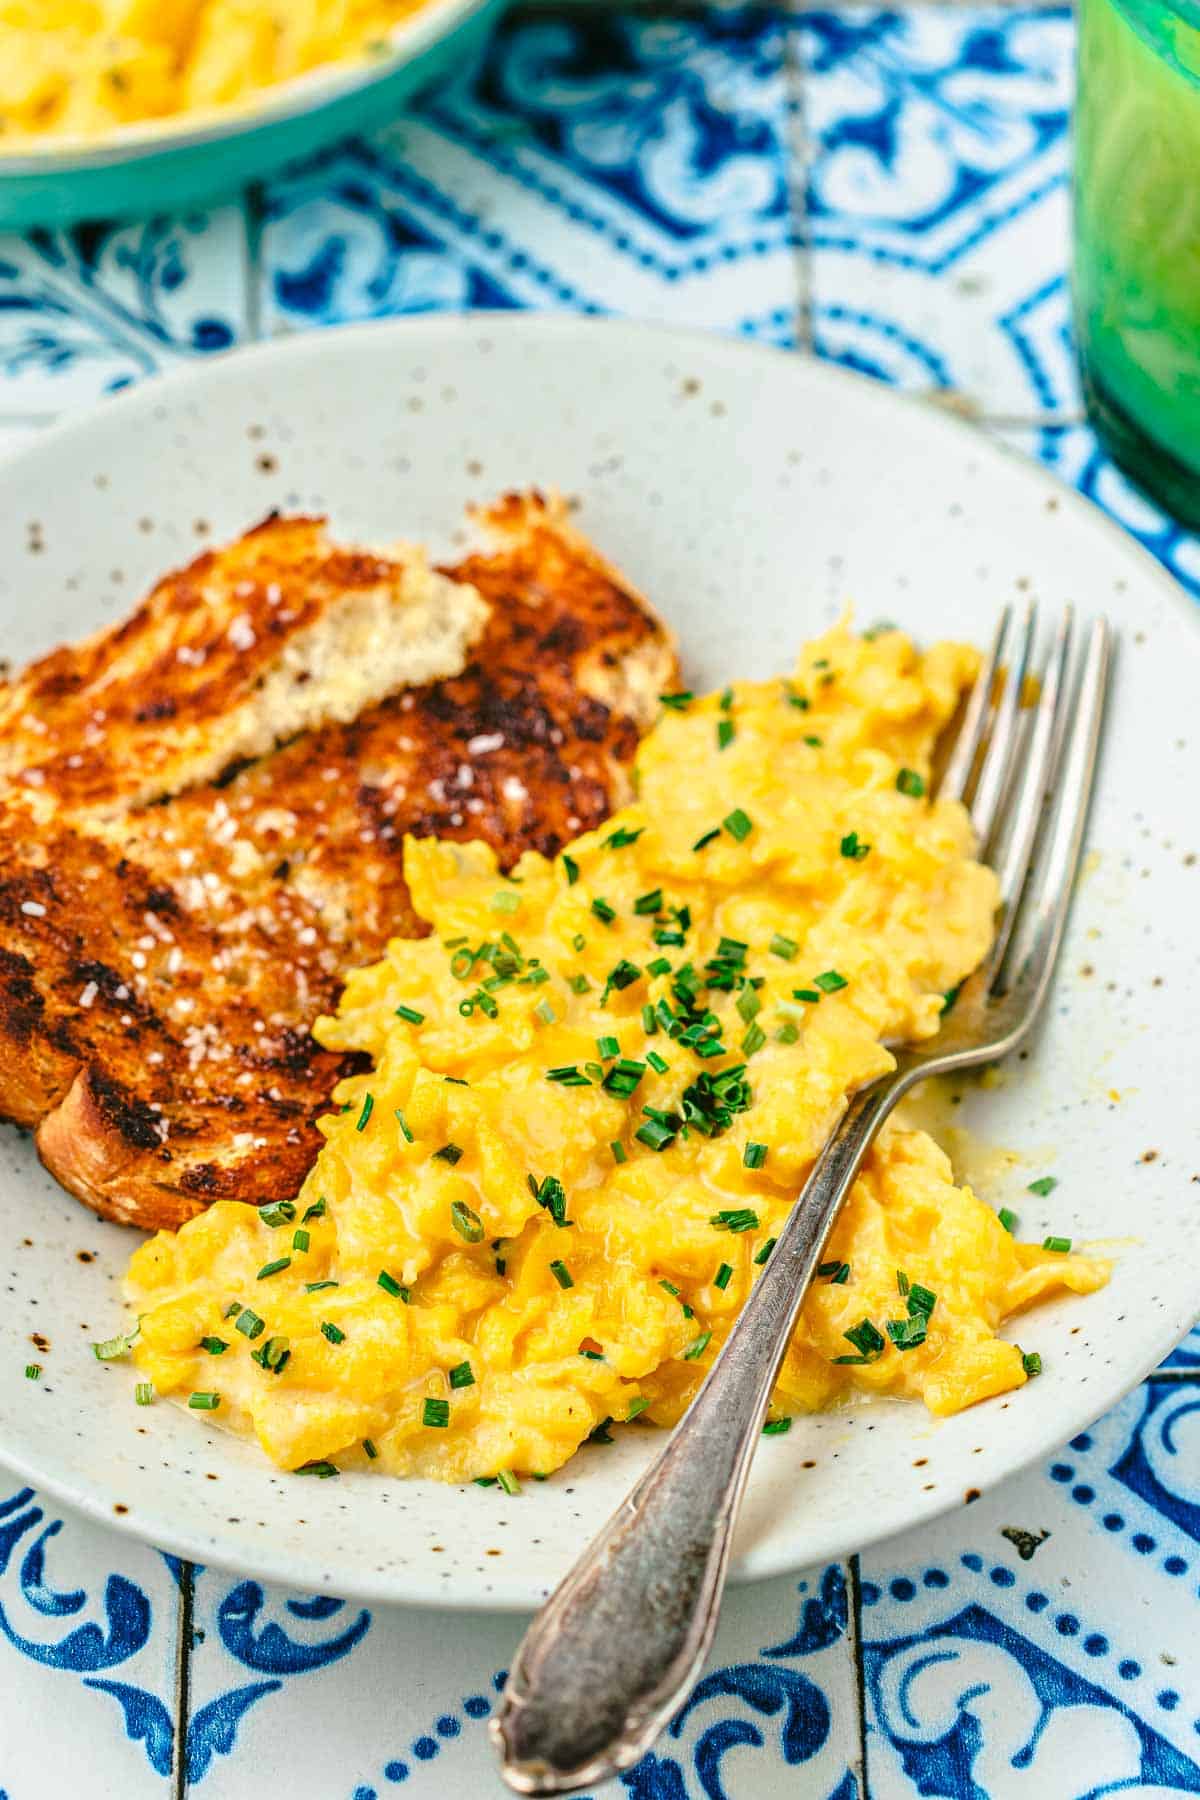 soft scrambled eggs topped with chives next to toast on a plate with a fork.